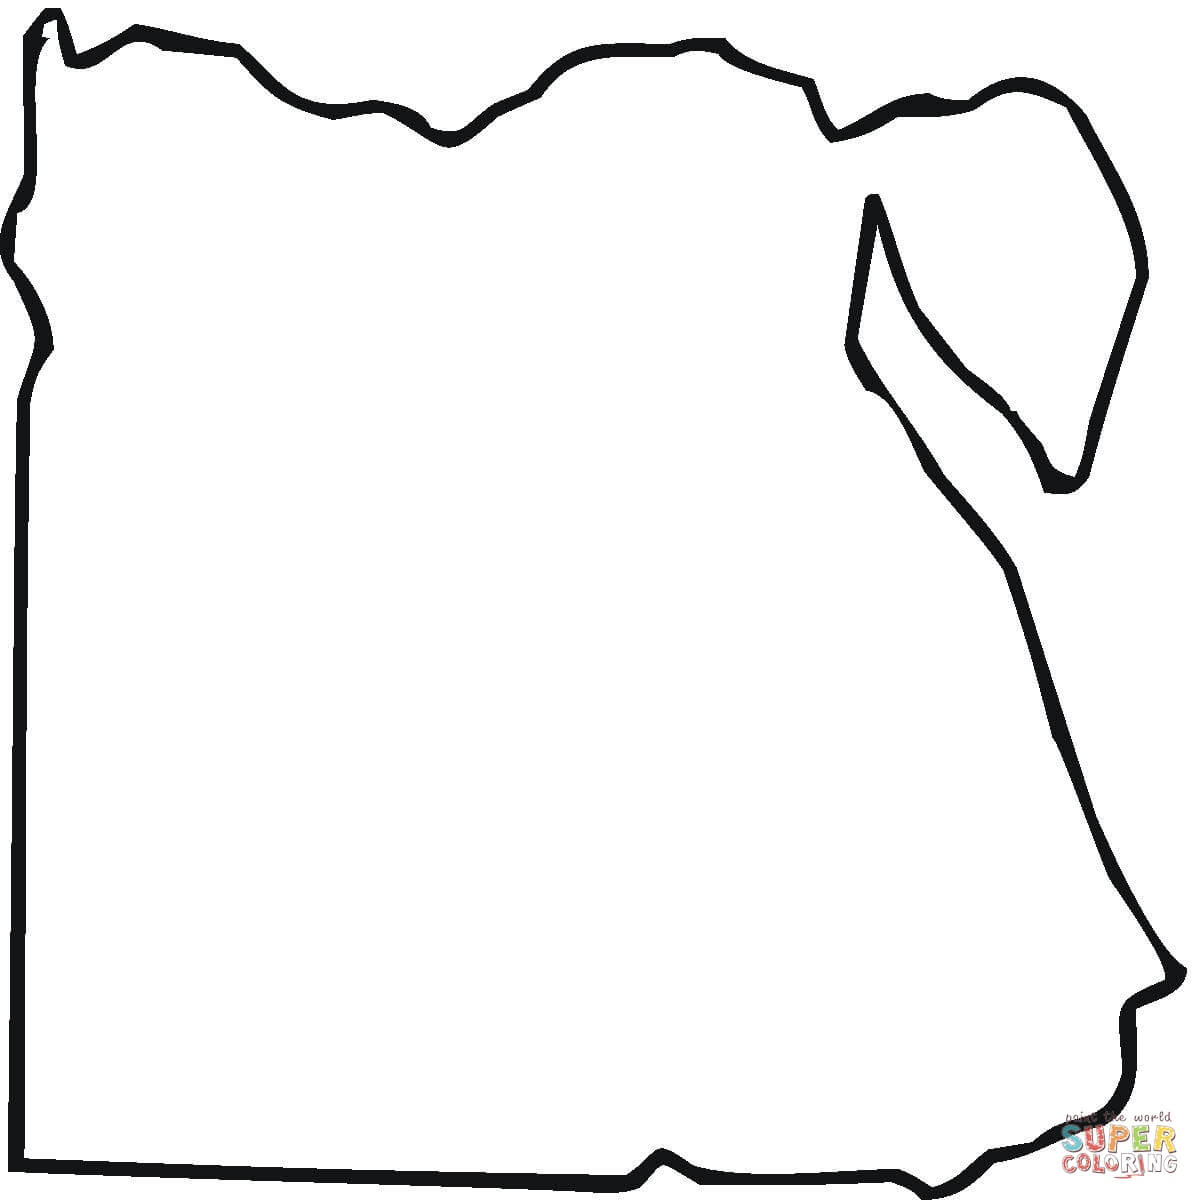 Maps coloring pages | Free Coloring Pages